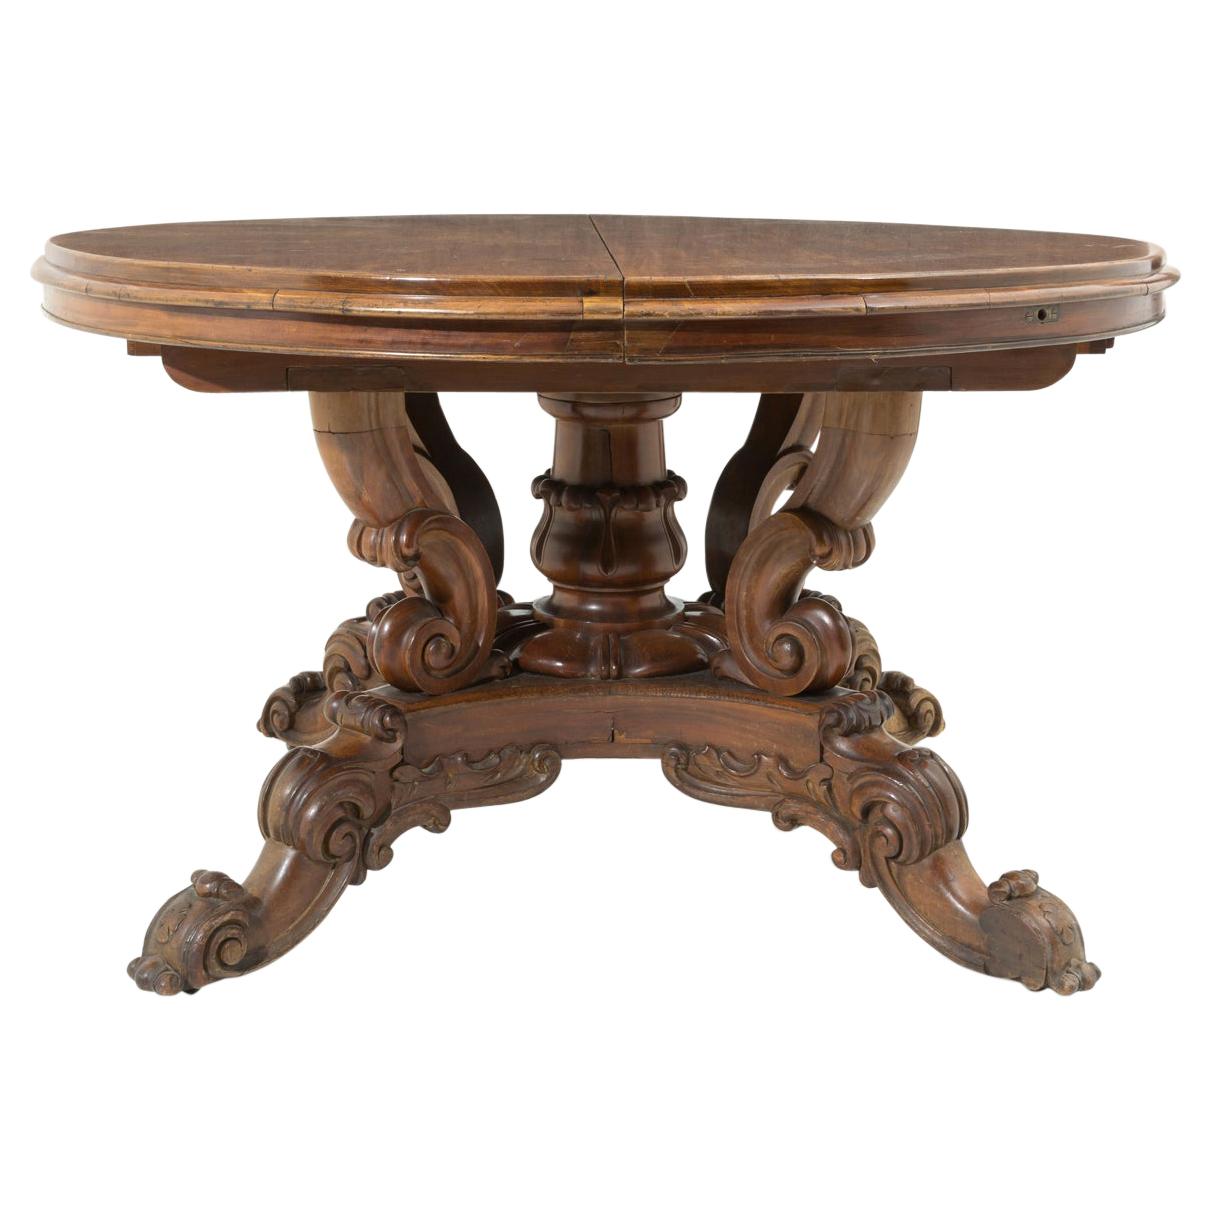 Elegant Round Table in Wood from 19th Century